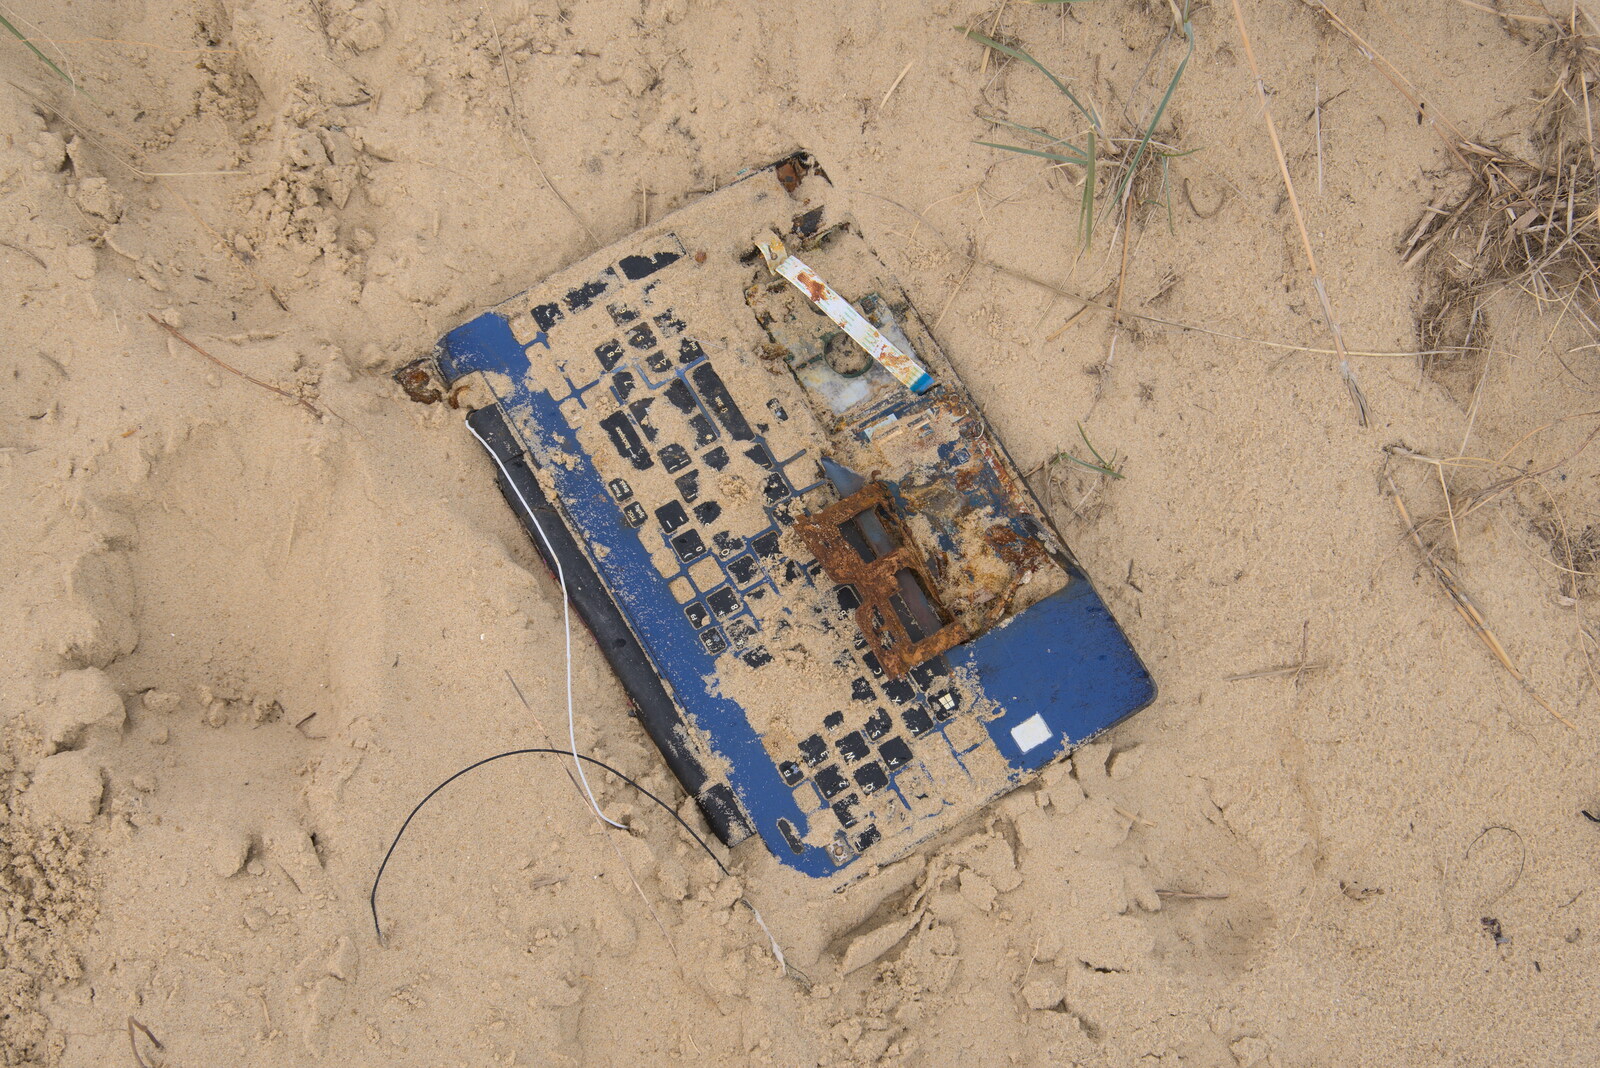 There's a discarded laptop on the beach from A Chilly Trip to the Beach, Southwold Harbour, Suffolk - 2nd May 2021